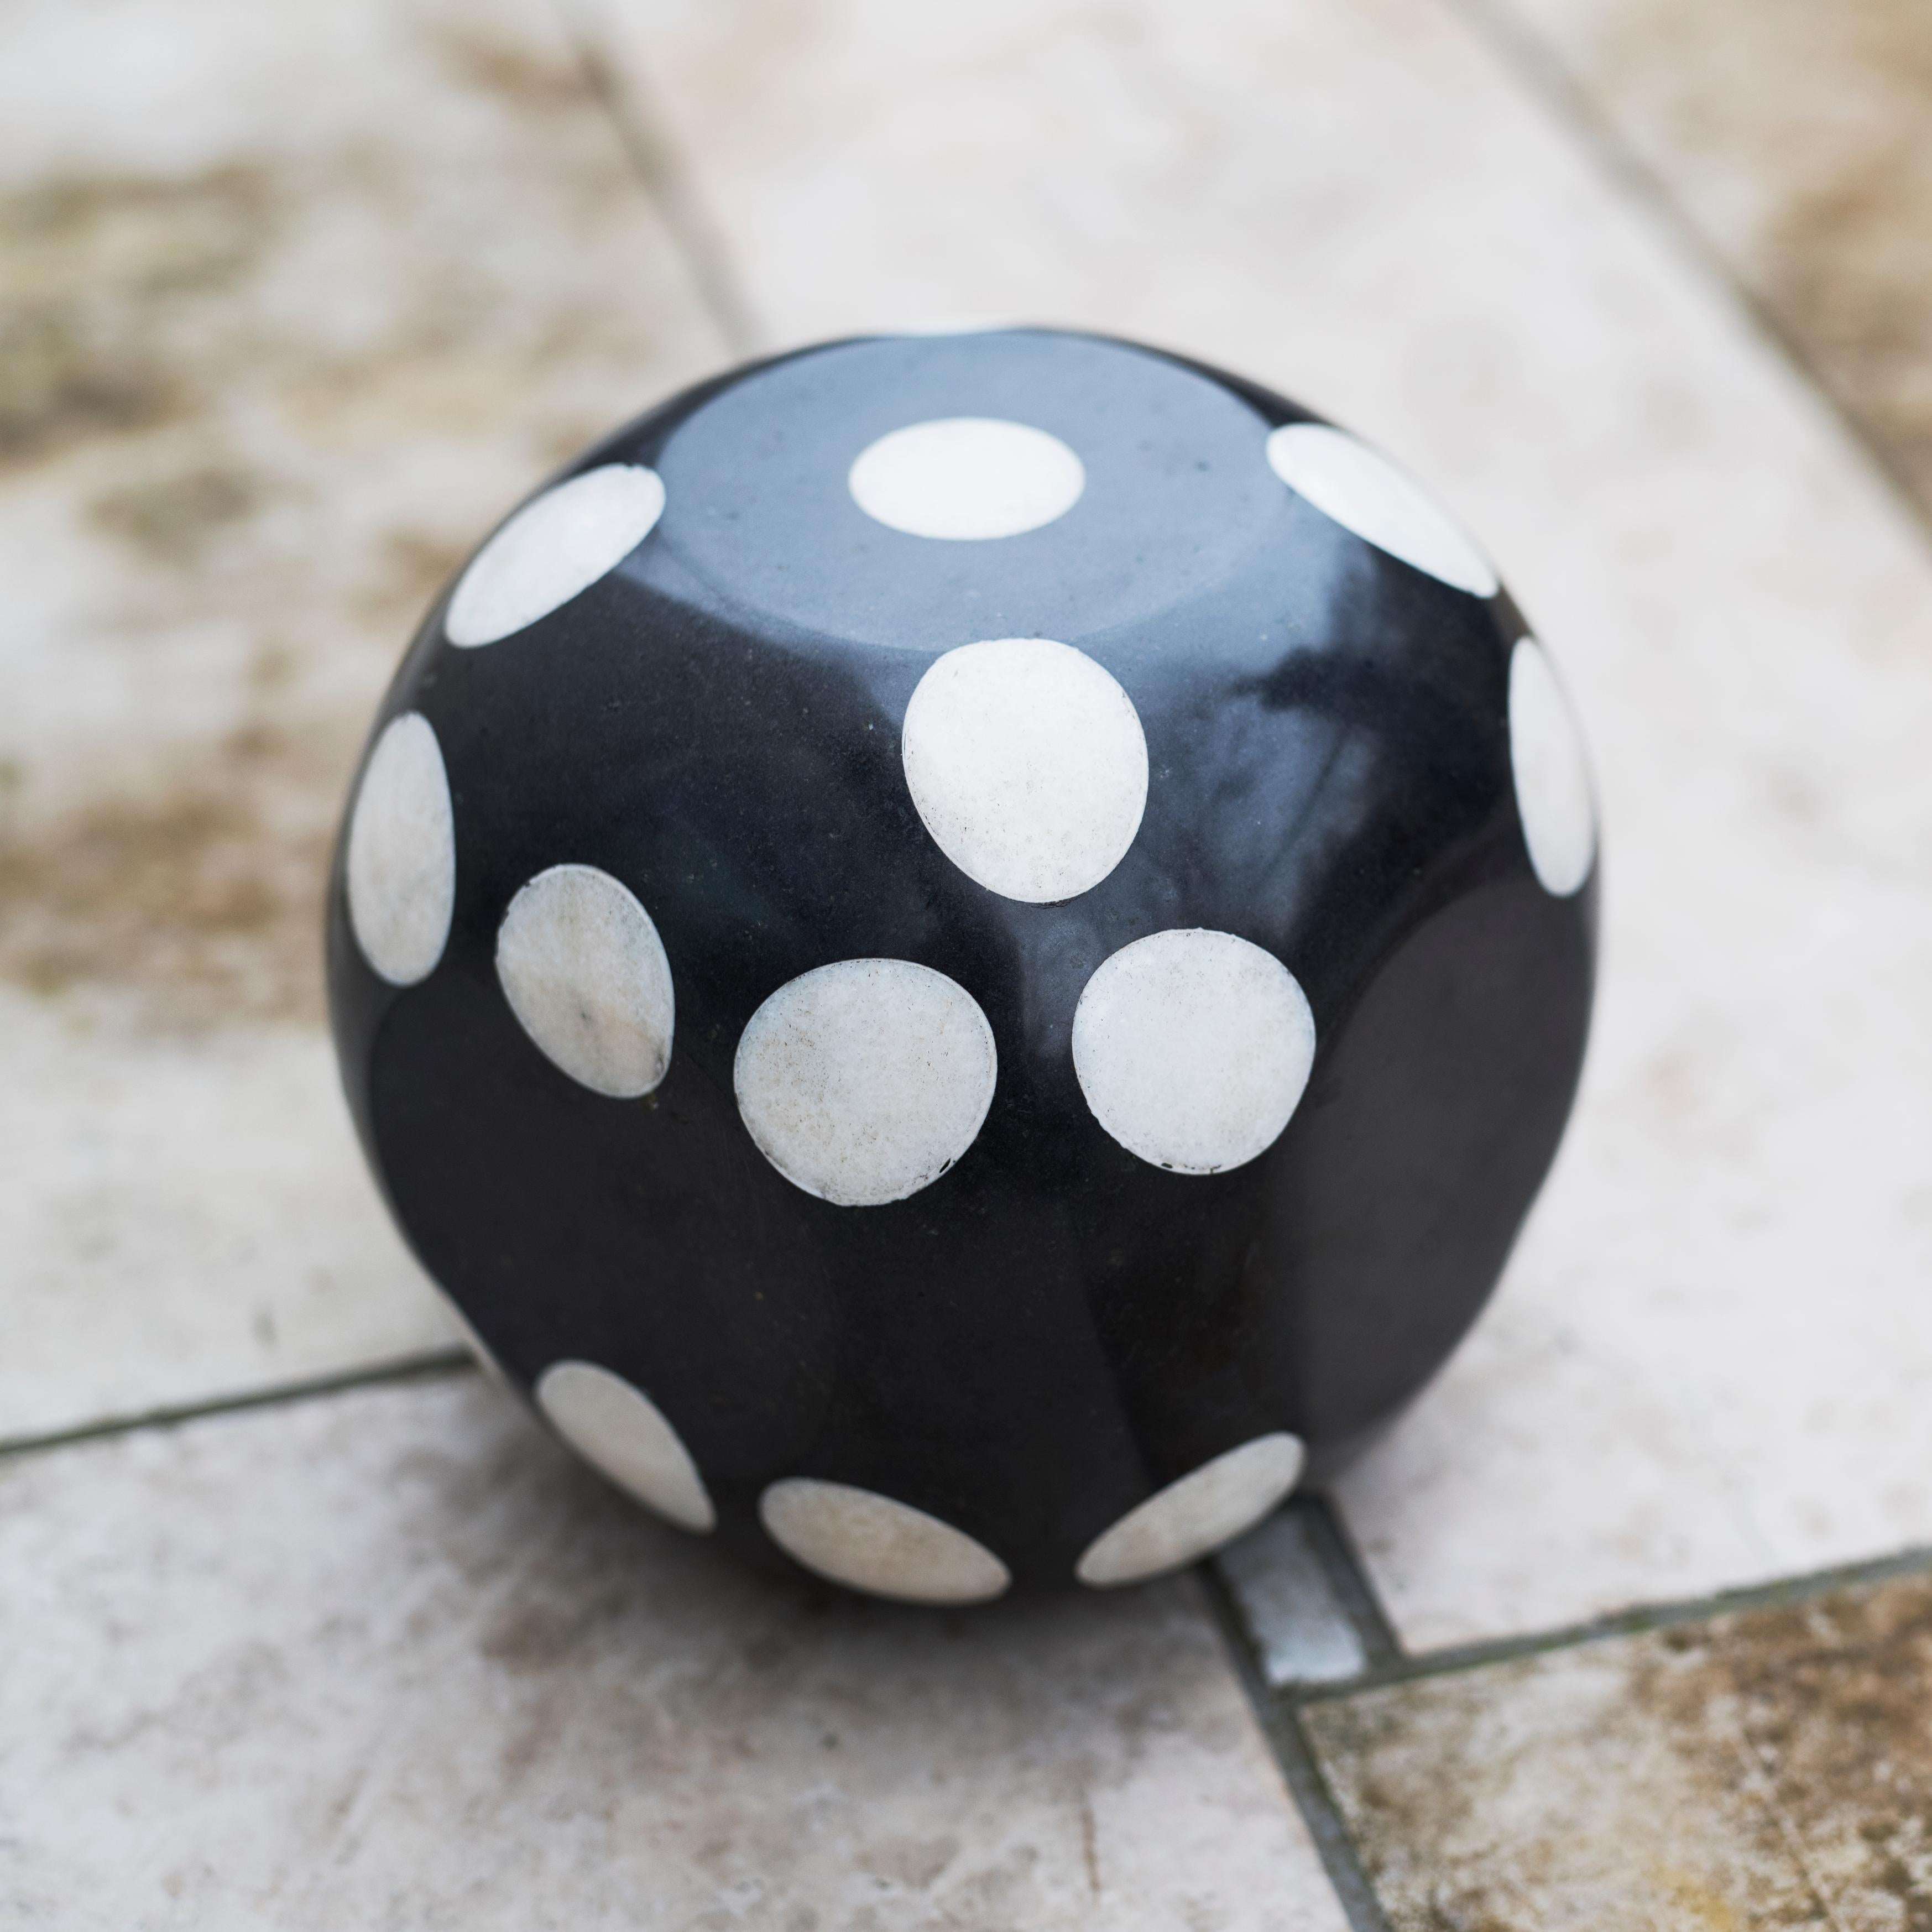 (4 pieces) Rolling dice/Turning luck, Marble Sculpture, Suitable for Outdoors - Gray Abstract Sculpture by Bertalan Andrasfalvy